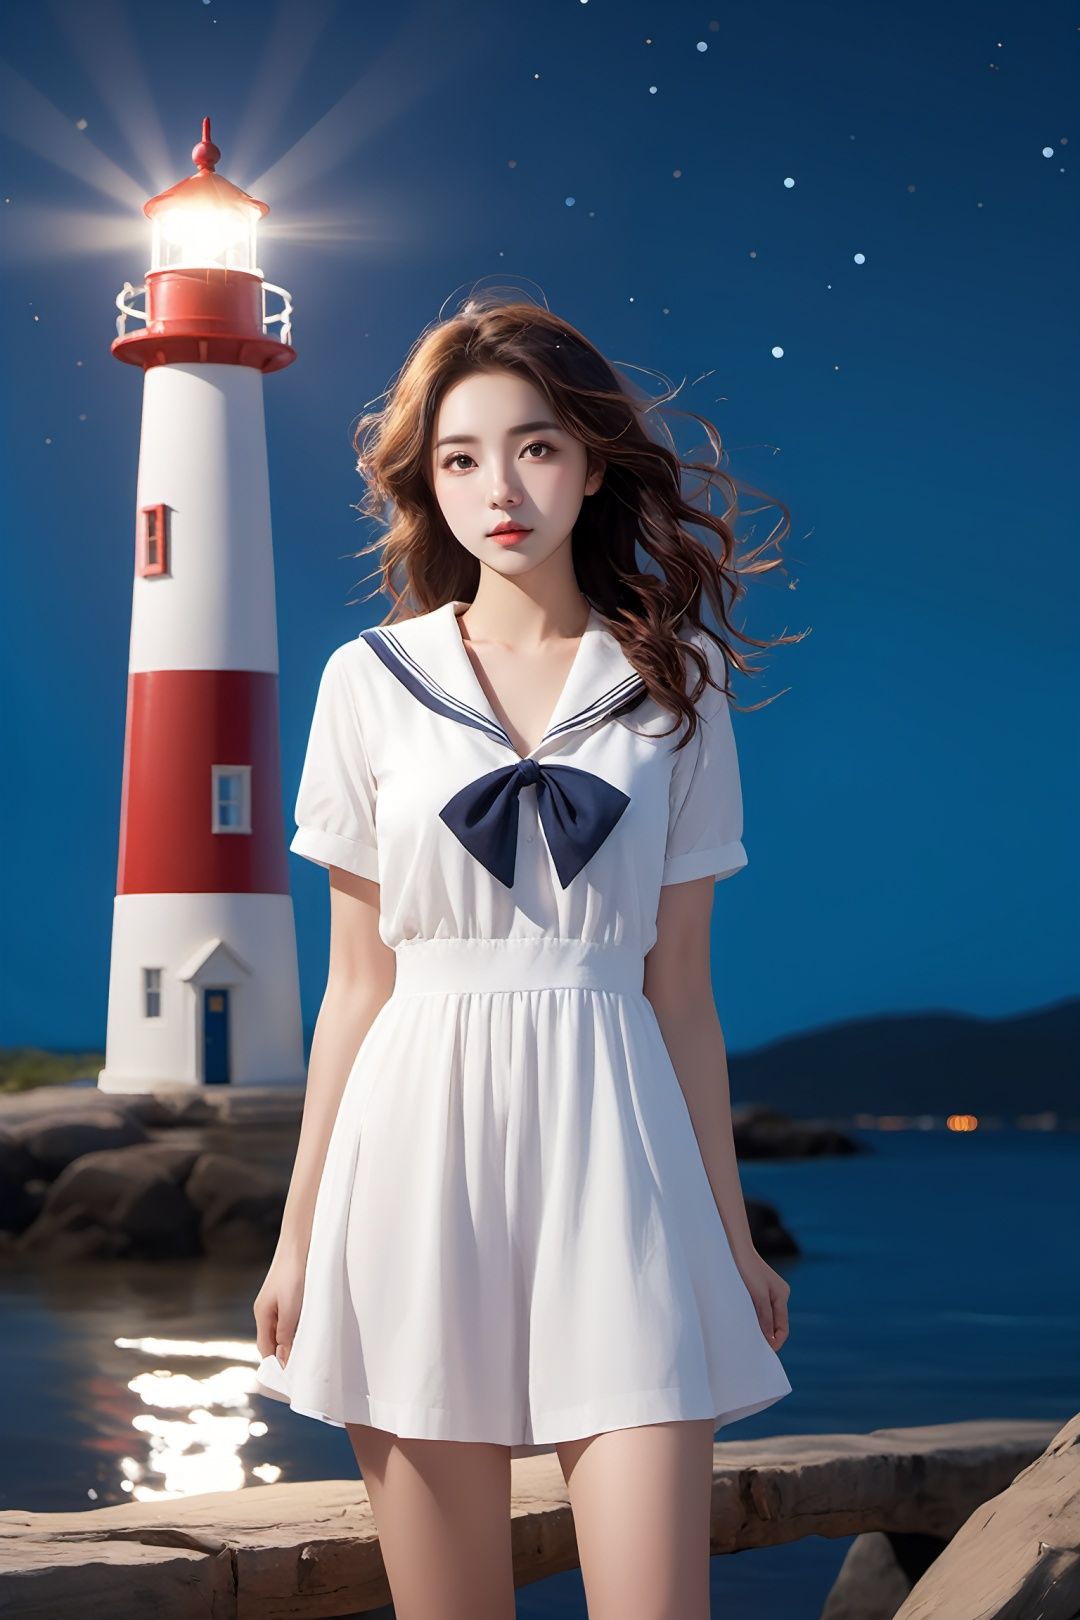 Real photos (1girl: 1.2),  curly hair,  (sailor suit: 1.3),  (realistic style),  (lonely lighthouse standing on the shore),  (night),  (moonlight),  (breeze),  (sparkling water),  a clear stream flowing slowly,  (natural scenery),  (distant mountains),  (starry sky),  (peaceful atmosphere),  master work,  high detail,  (close-up of characters), MAJICMIX STYLE,<lora:EMS-89582-EMS:0.800000>